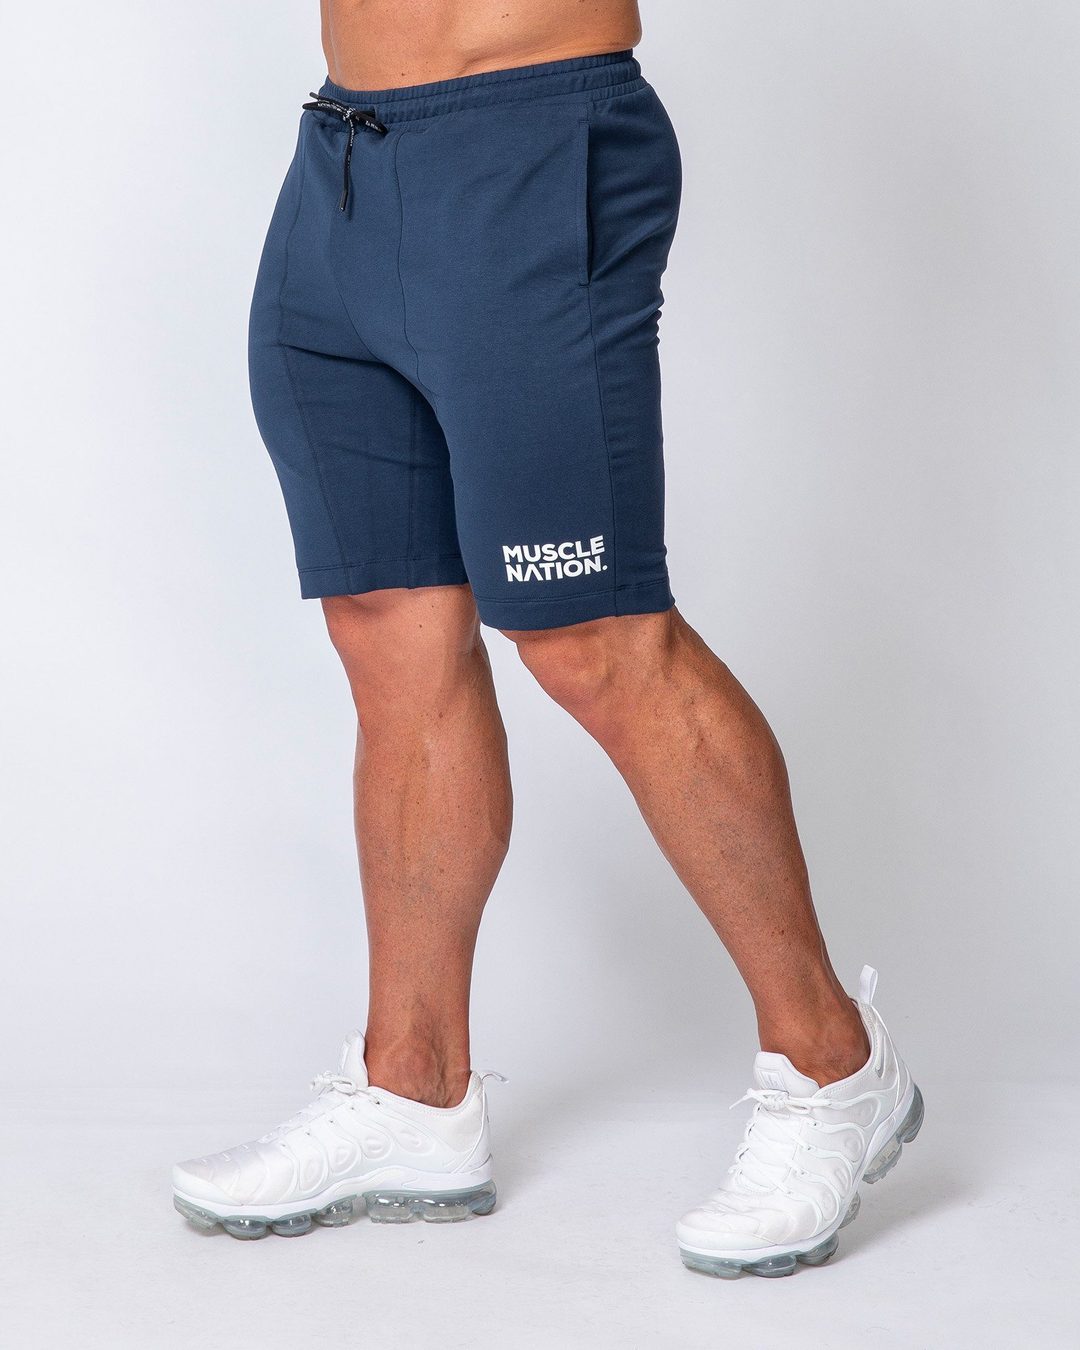 musclenation Ultimate Tapered Fit Shorts - Navy